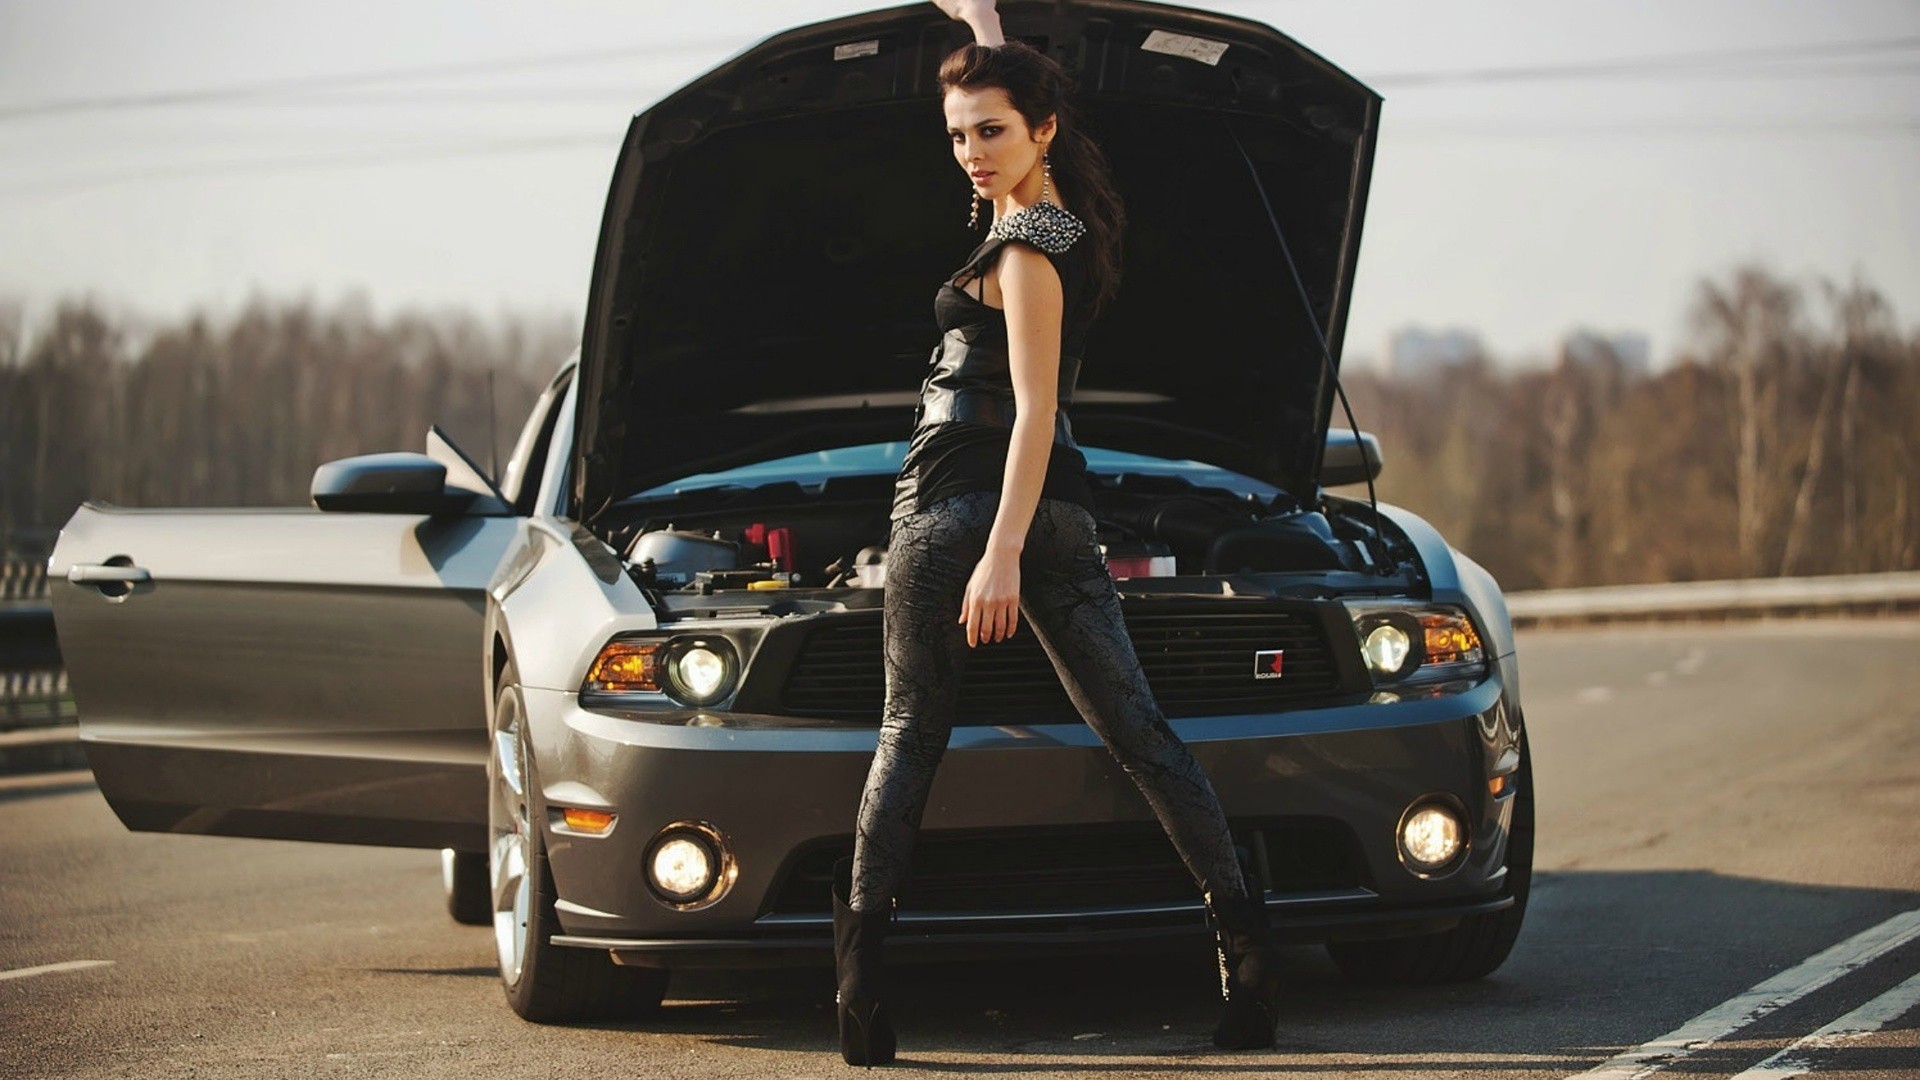 1920x1080 Mustang girls picture for desktop and wallpaper. Yes, thank you.